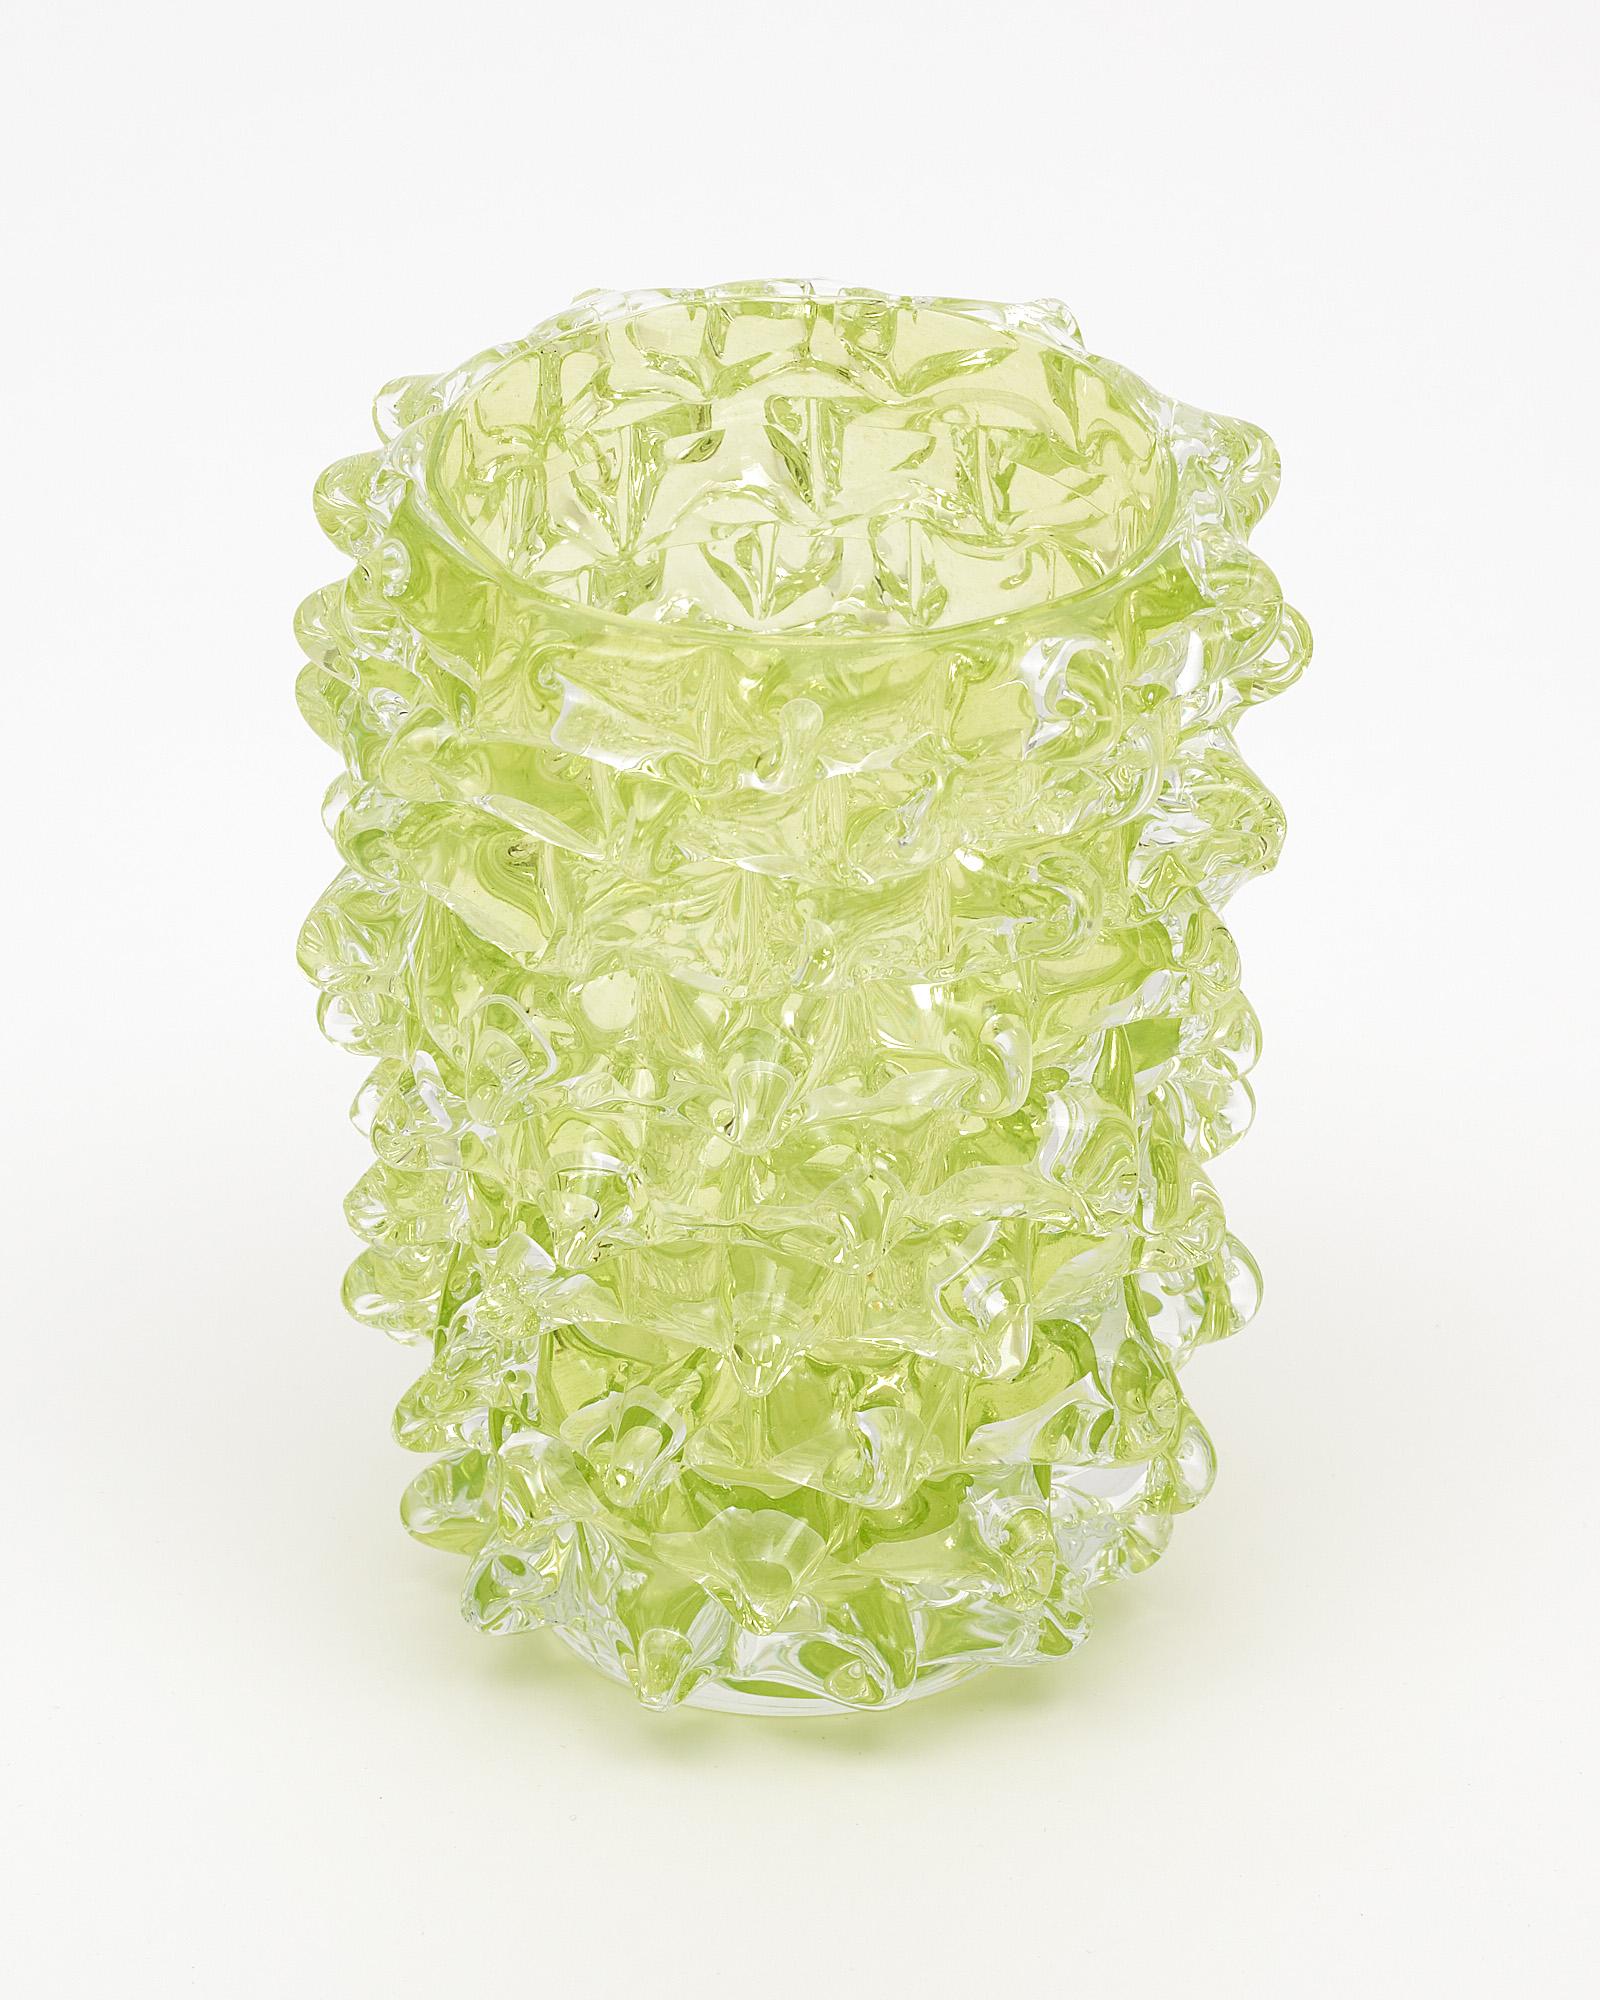 Murano glass vase, Italian, from the island of Murano and crafted in the manner of Barovier. This hand-blown piece has a striking lime green color and is made with the “rostrate” technique.